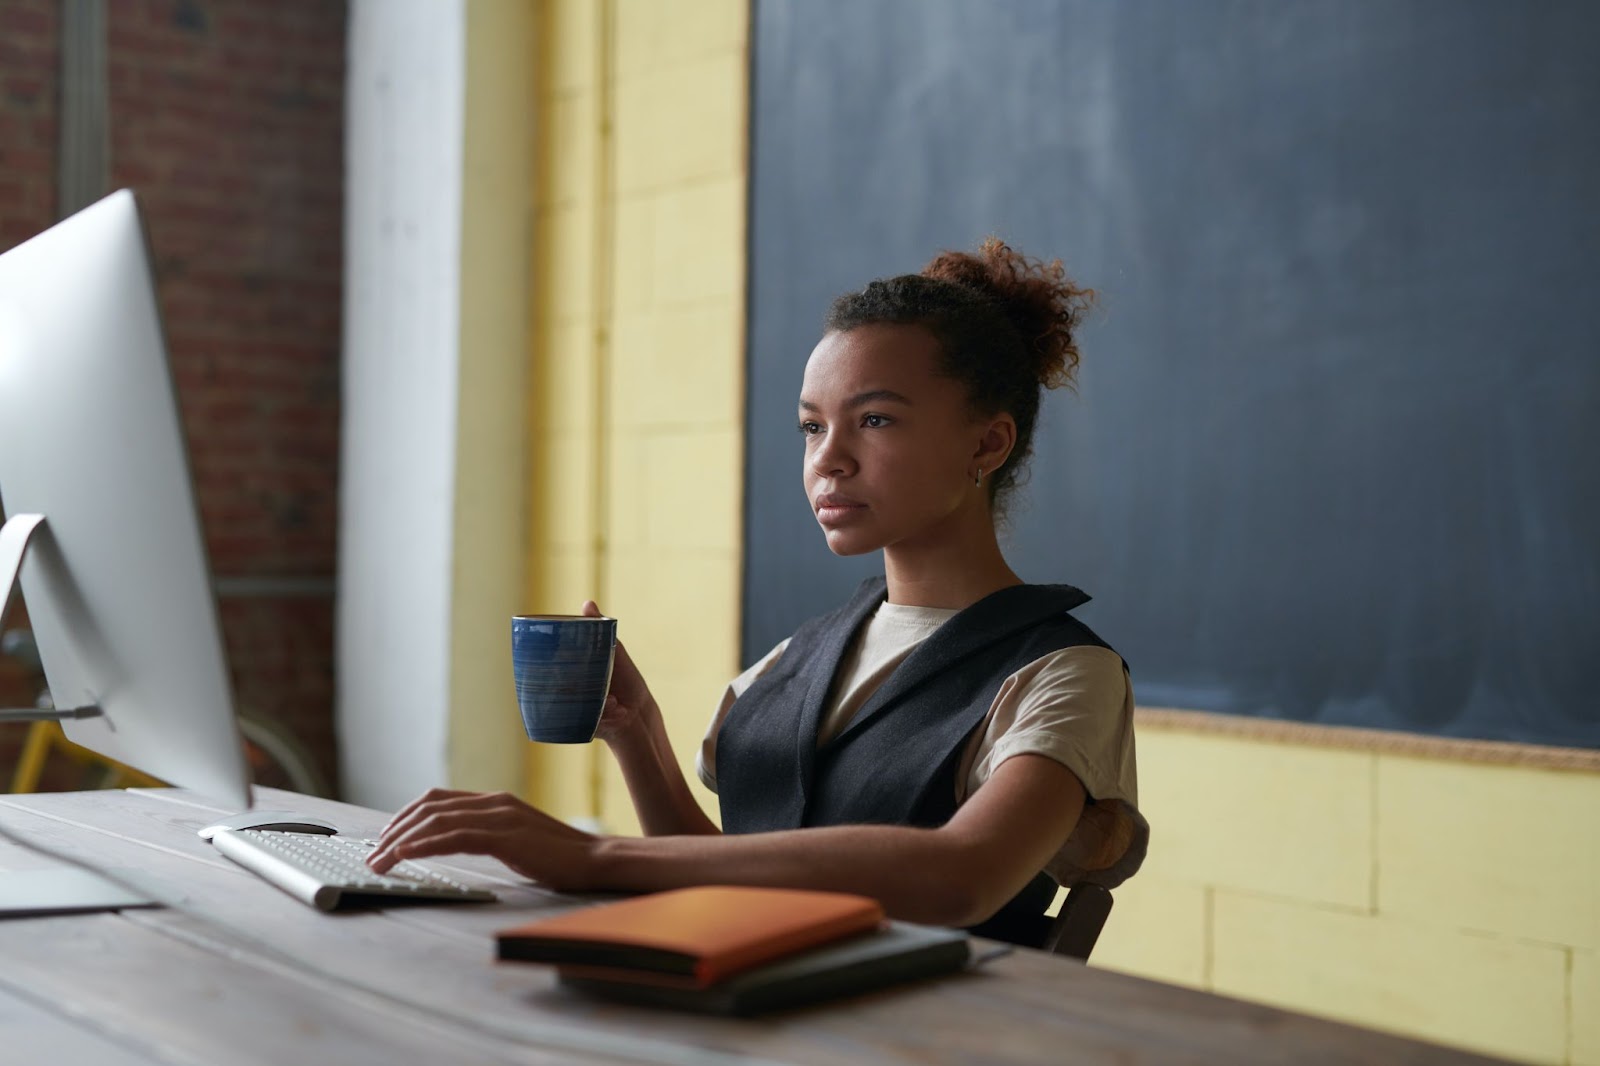 A woman is siting at her desk looking at her computer. She is holding a blue mug in her right hand, and the fingers on  her left hand are on the computer keyboard. An orange book and a blue book are on the desk, and a blackboard on a yellow wall is behind the woman.